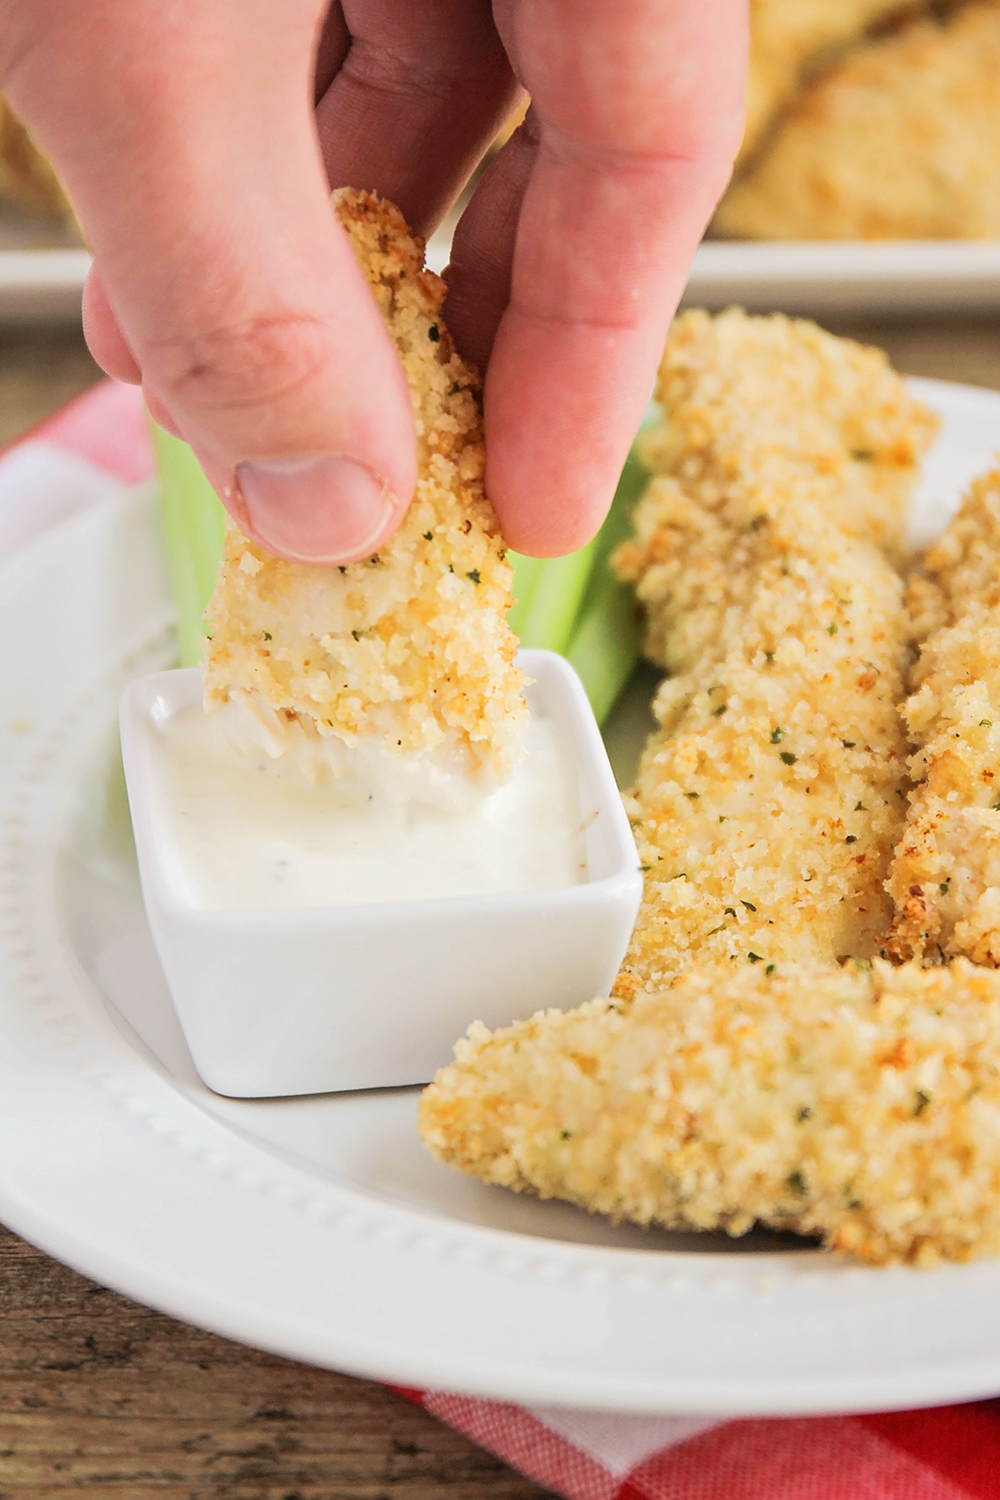 These delicious crispy ranch chicken fingers are super easy to make, and sure to please even the pickiest eaters!